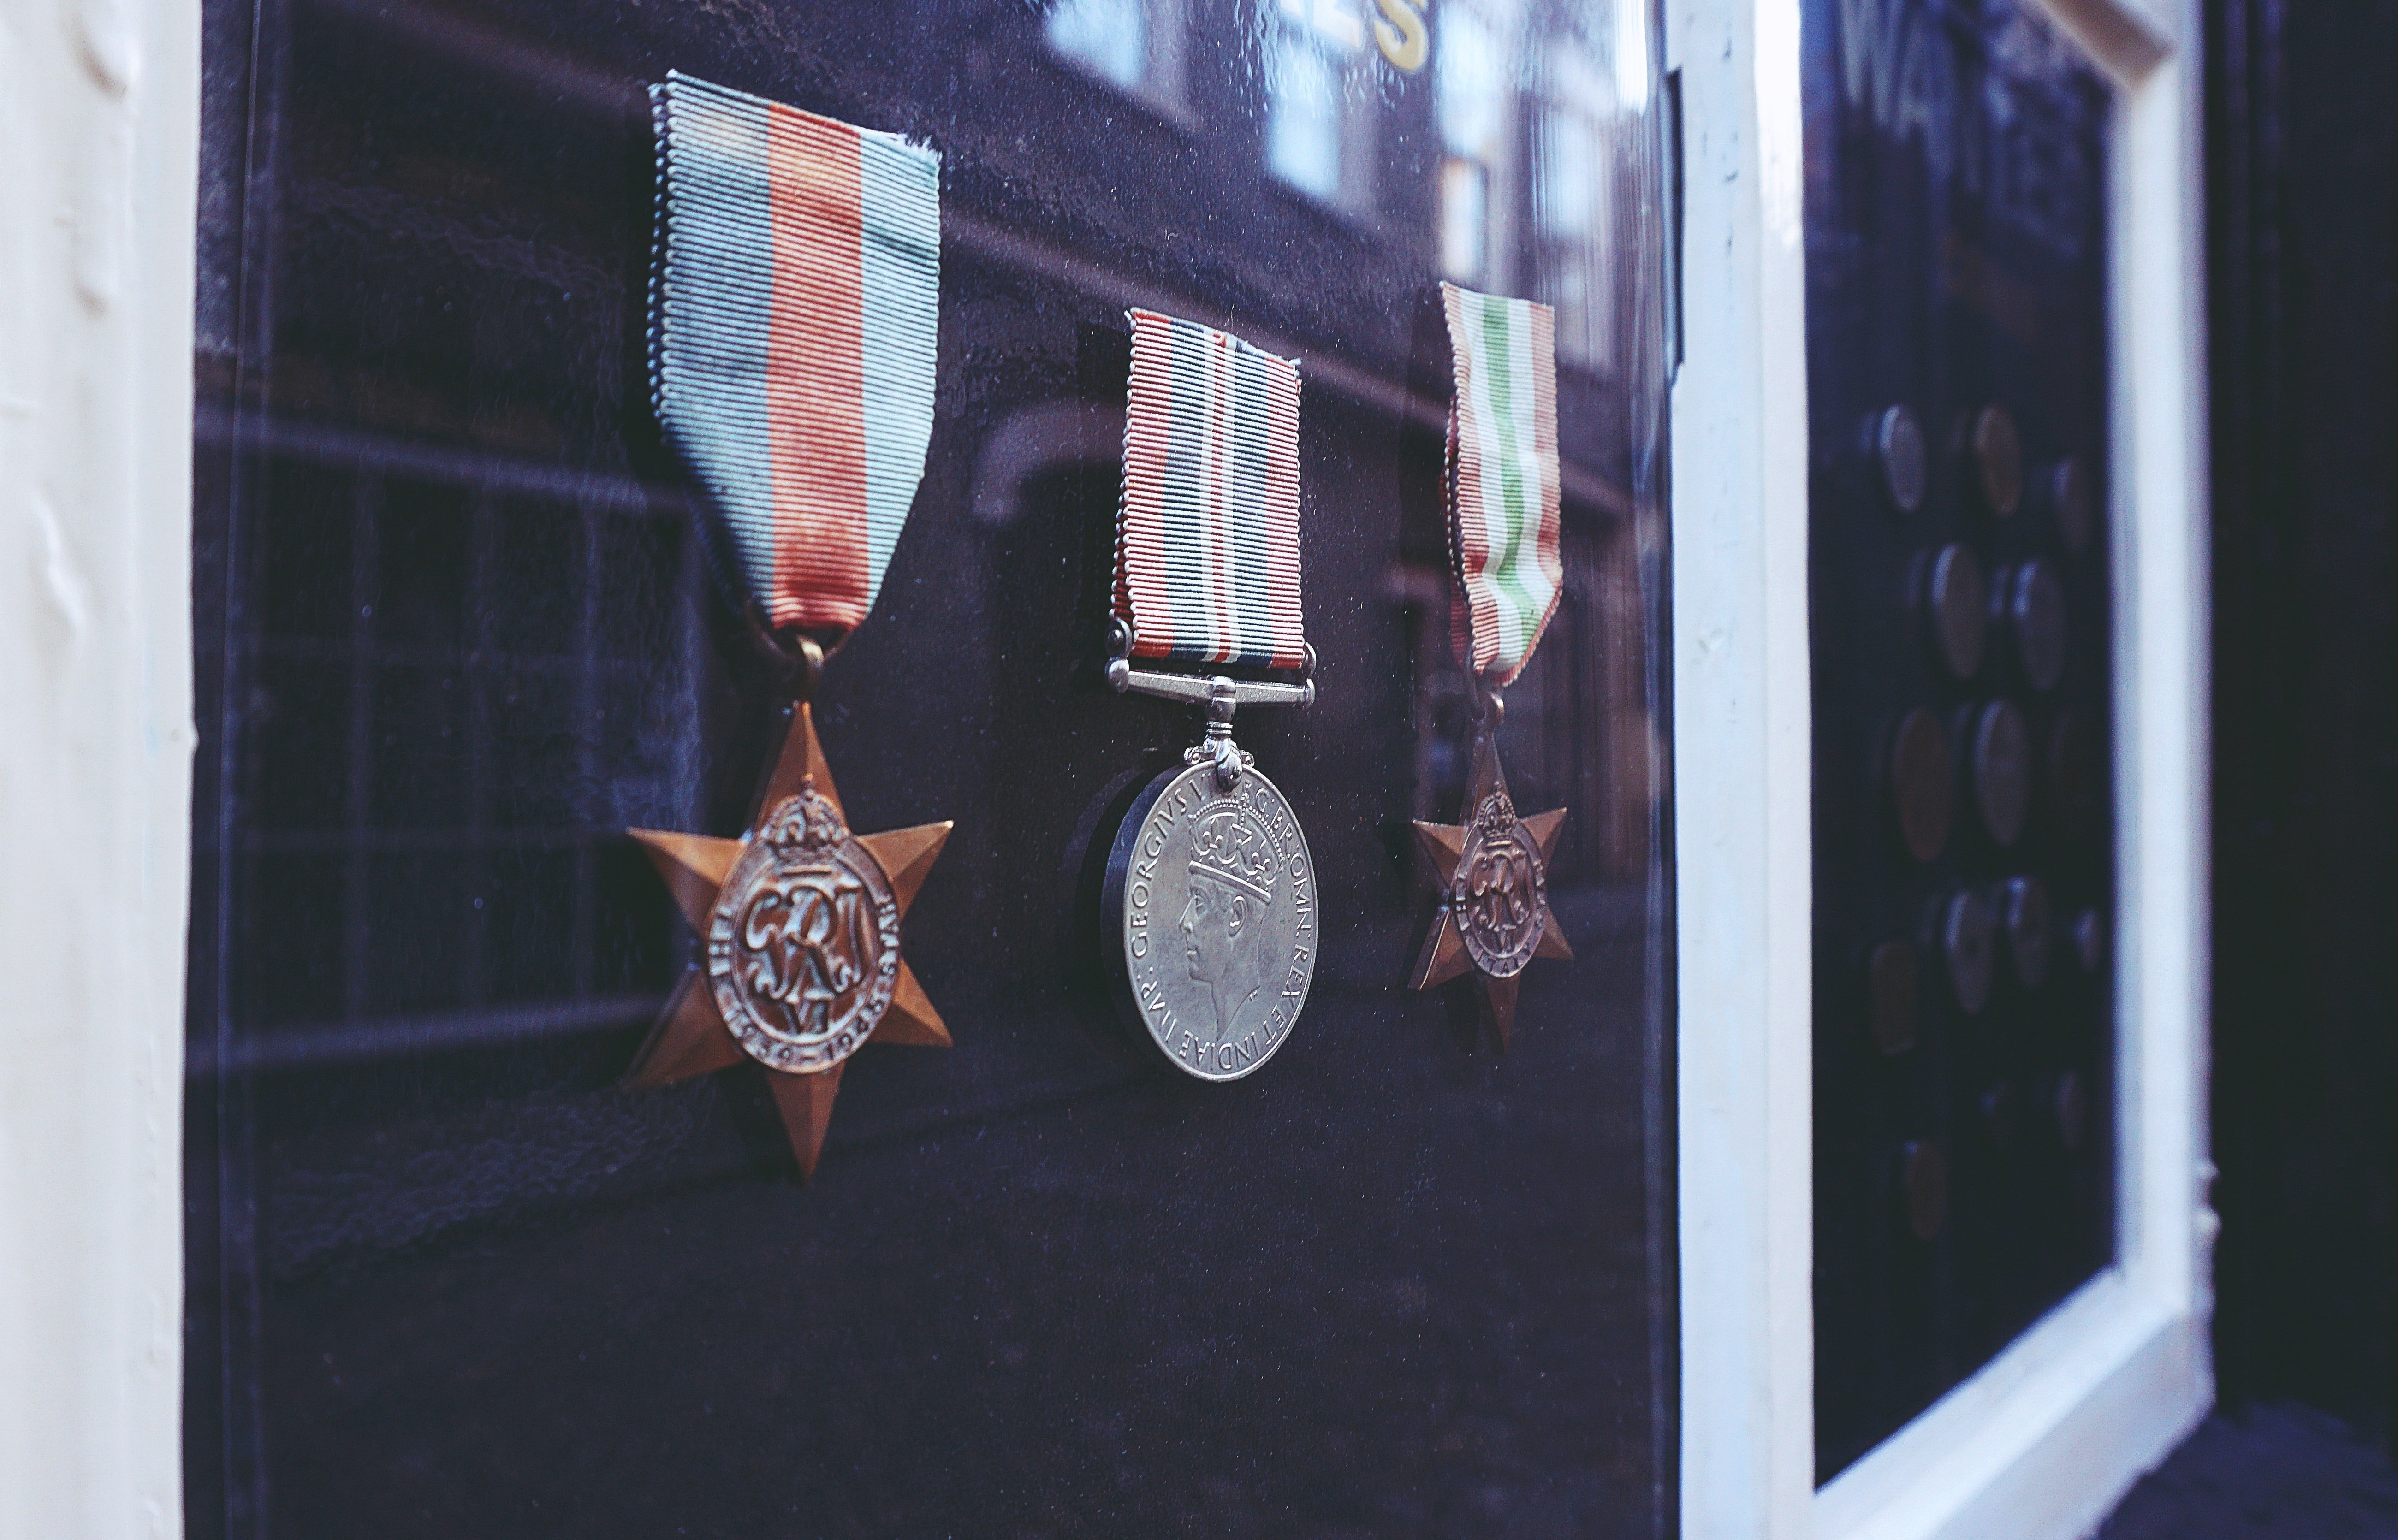 Tom saw the man had a lot of medals | Photo: Pexels